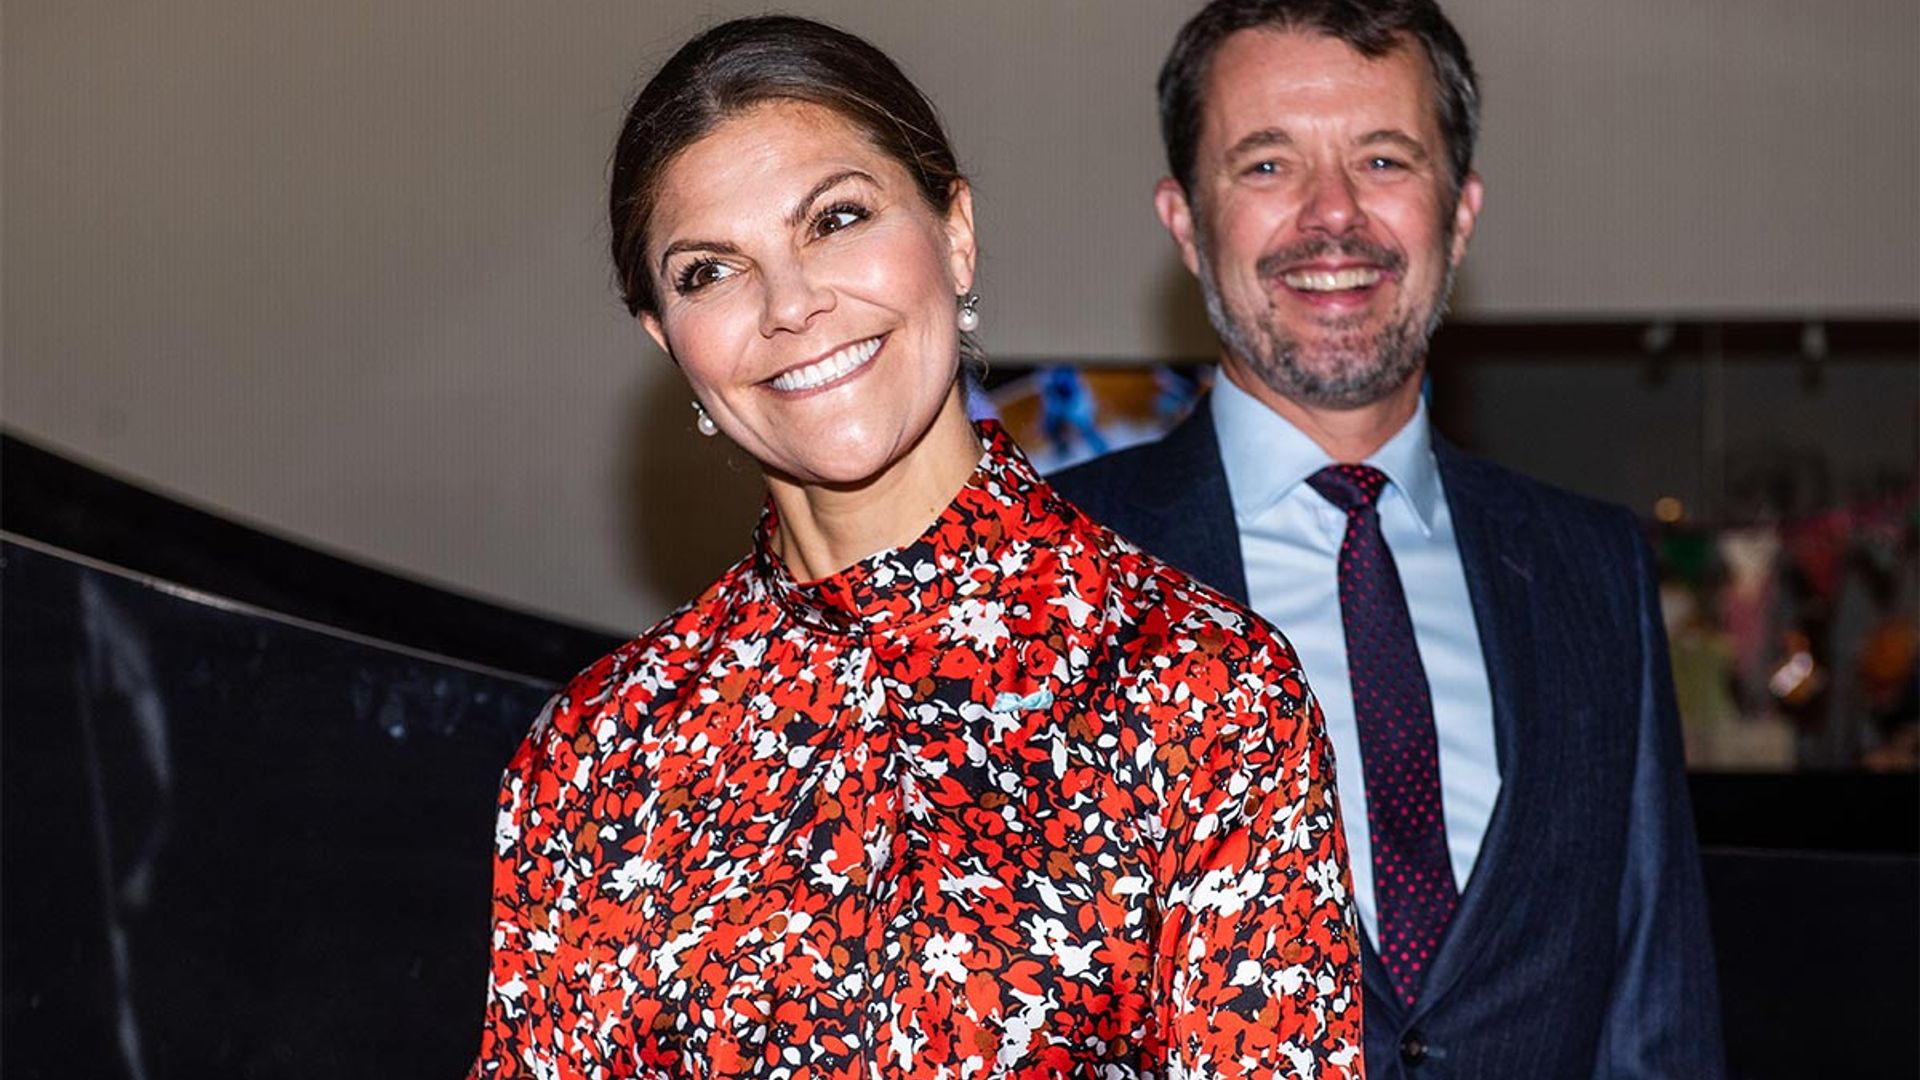 Royal fans react as Denmark's Prince Frederik and Sweden's Princess Victoria get competitive